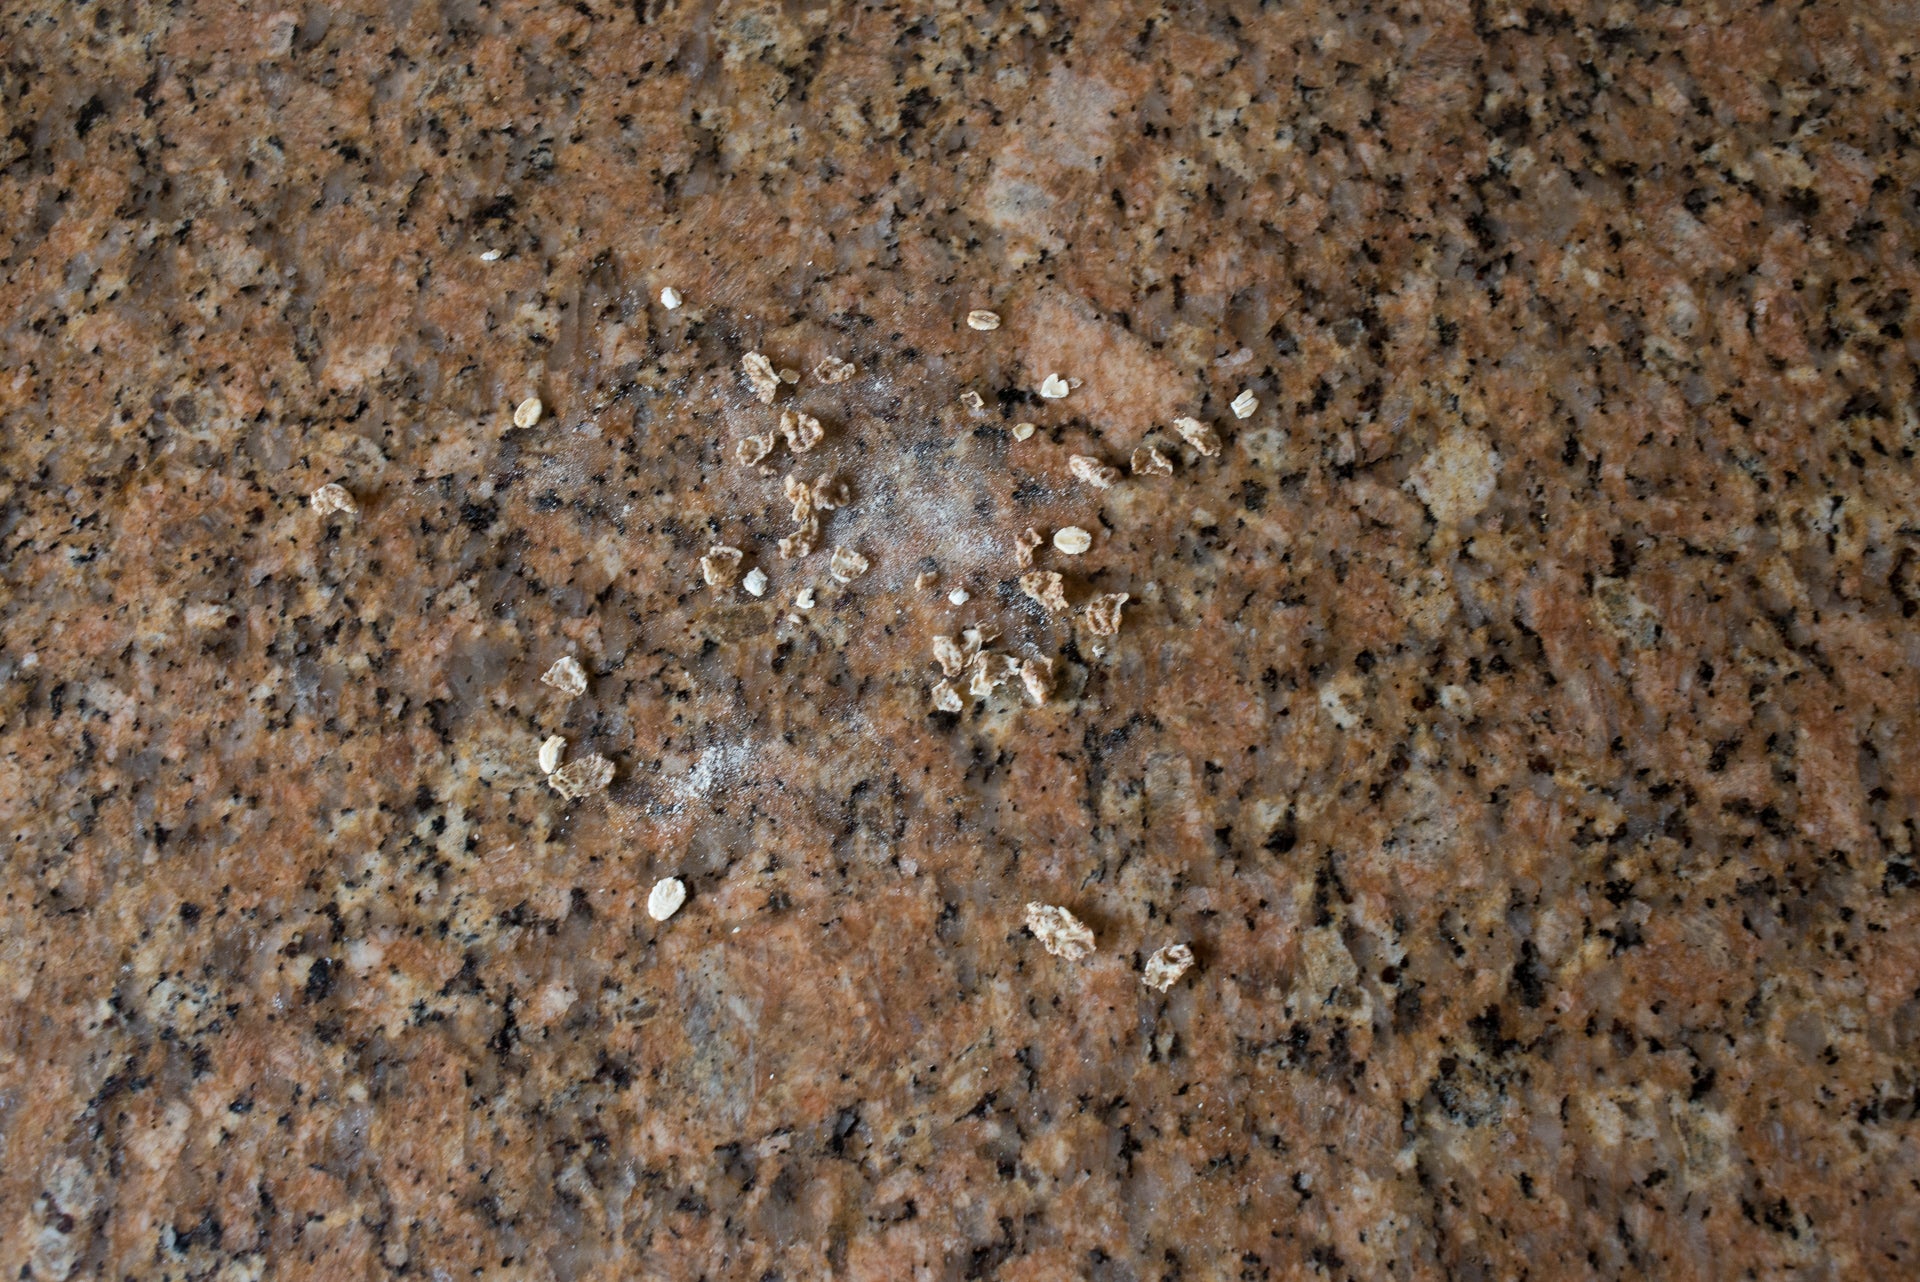 Messy crumbs scattered on granite countertop for vacuum test.